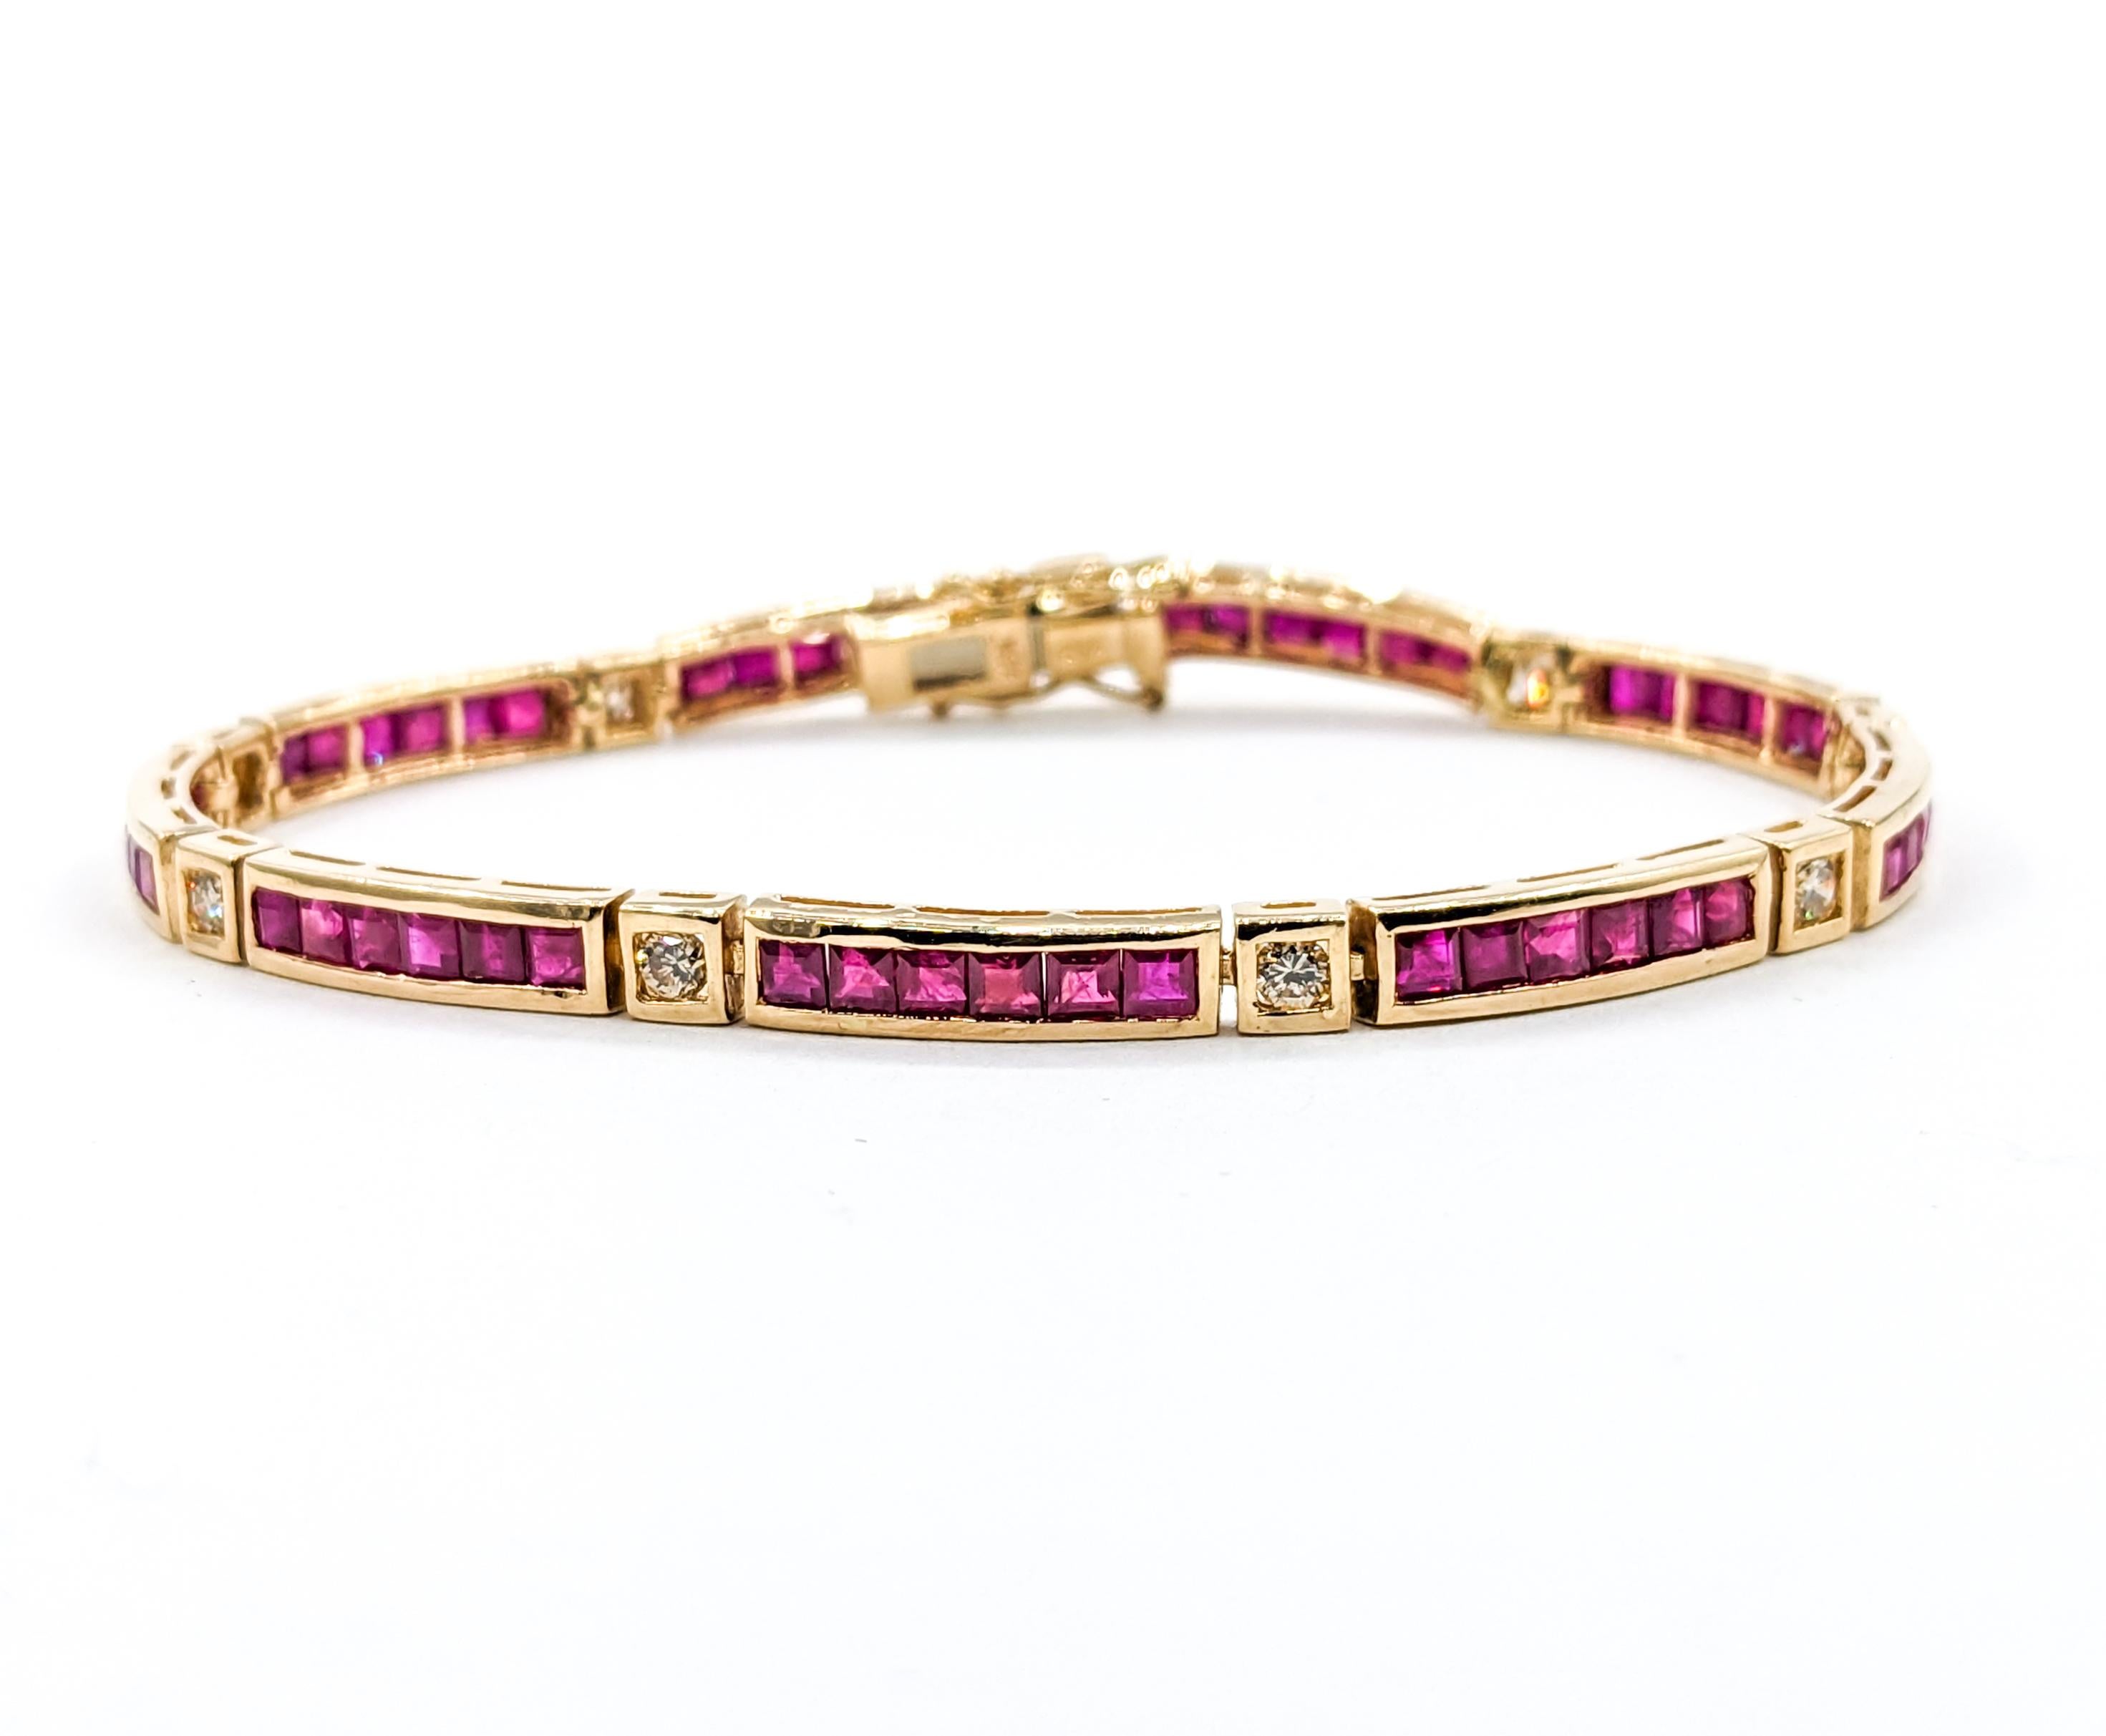 7.5ctw Ruby & Diamond Bracelet In Yellow Gold

Indulge in the elegance of this exquisite Bracelet, expertly crafted in 14kt Yellow Gold and adorned with a .50ctw of Round Diamonds. The Sparkly Diamonds showcase SI clarity and a Near Colorless white